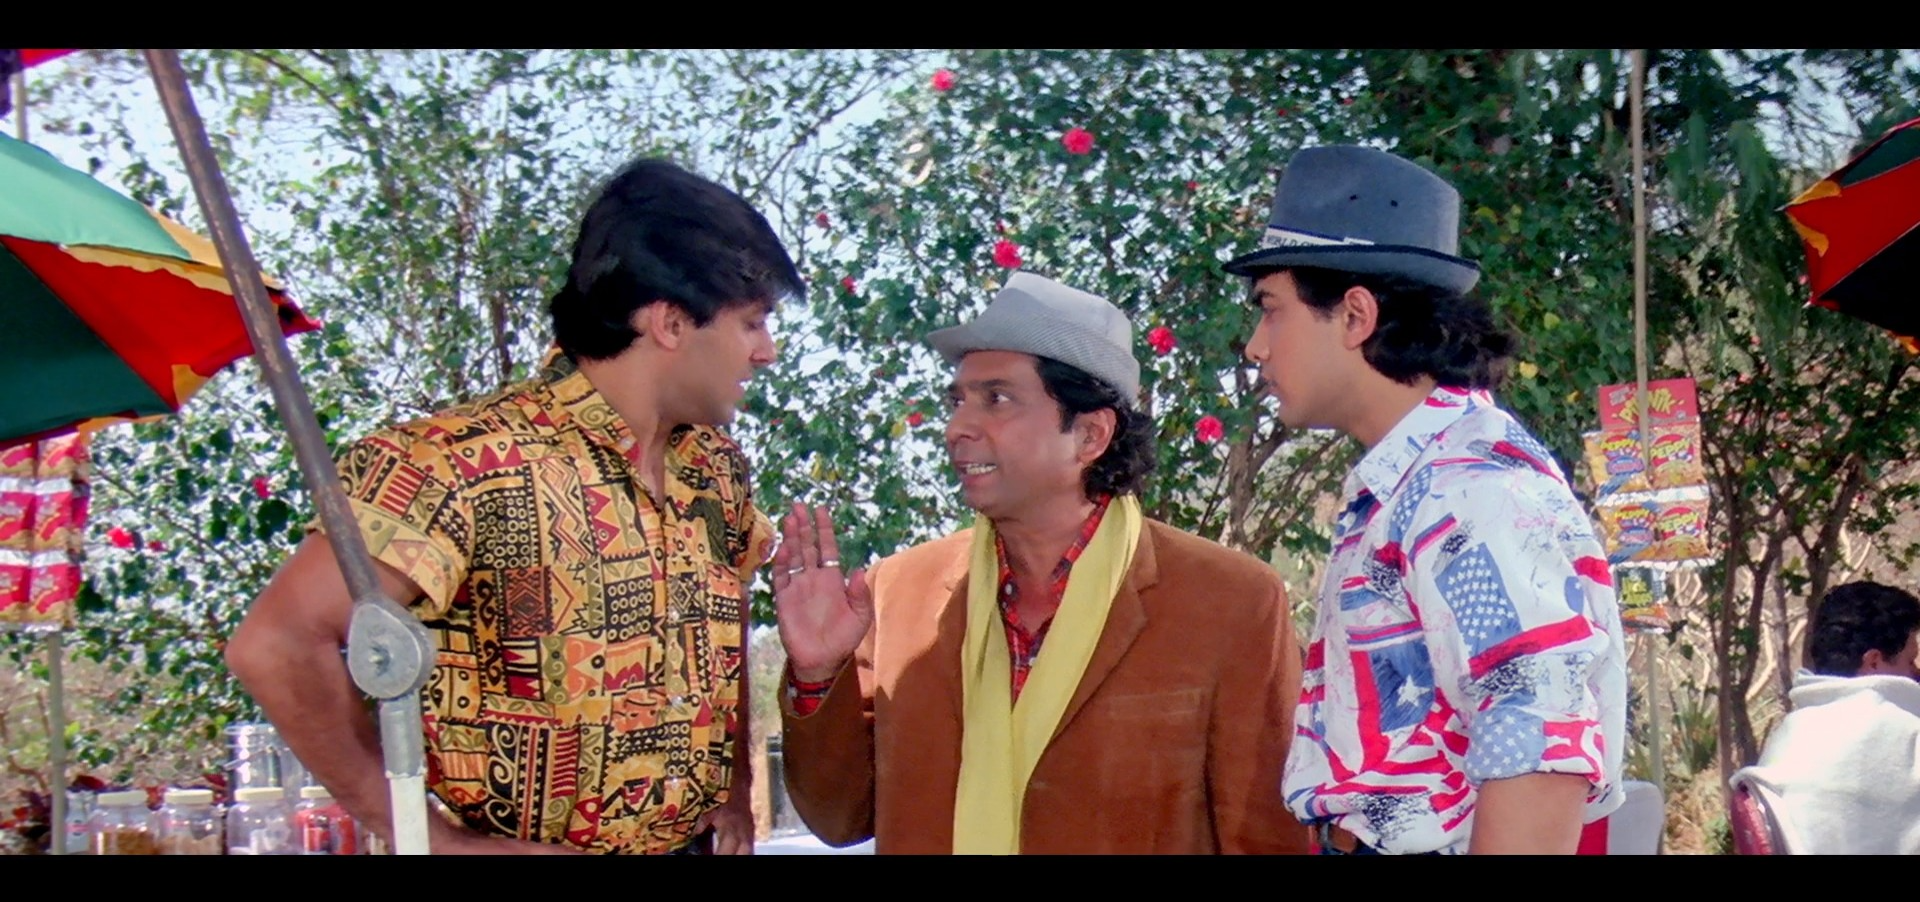 Prem and Amar talking to another person with